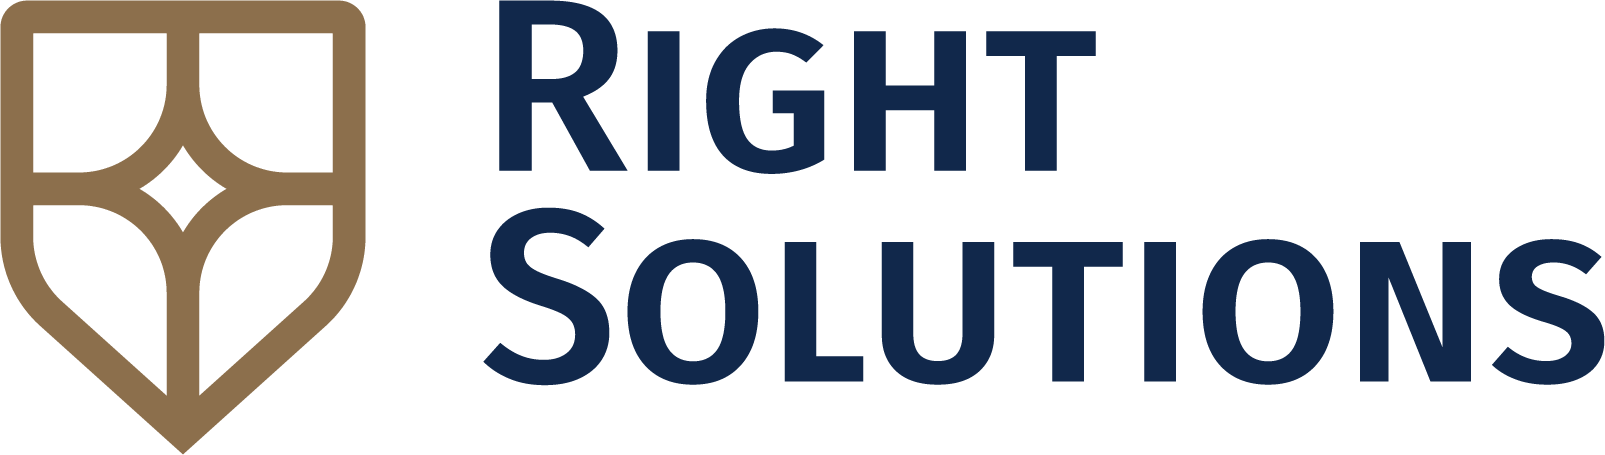 Right Solutions